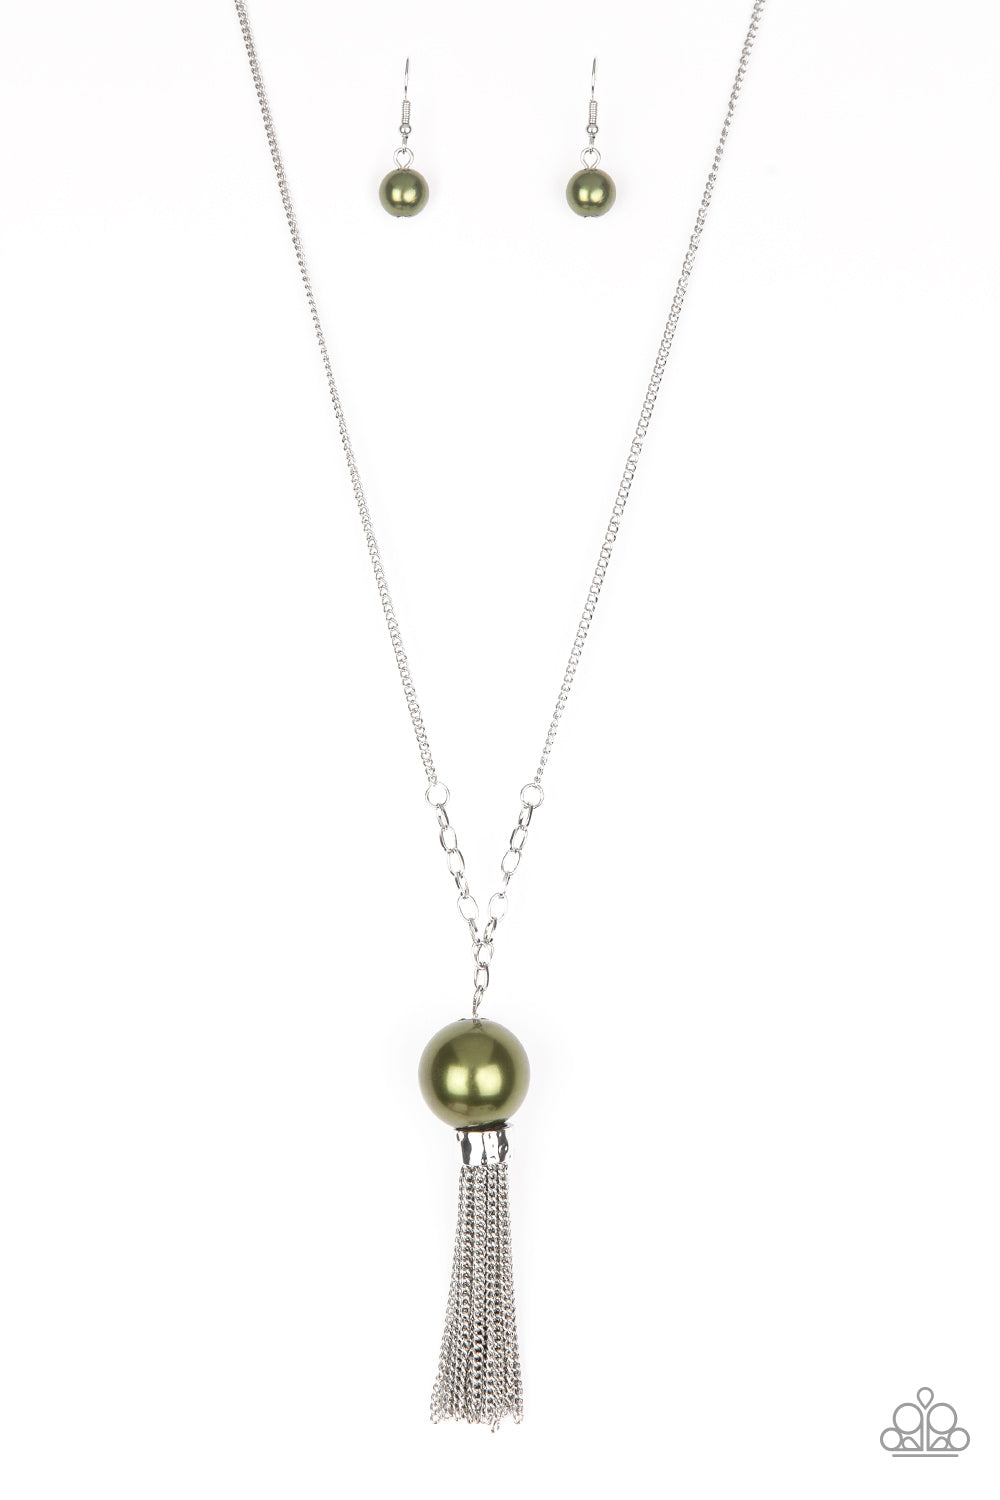 Paparazzi - Belle Of The BALLROOM - Green Necklace